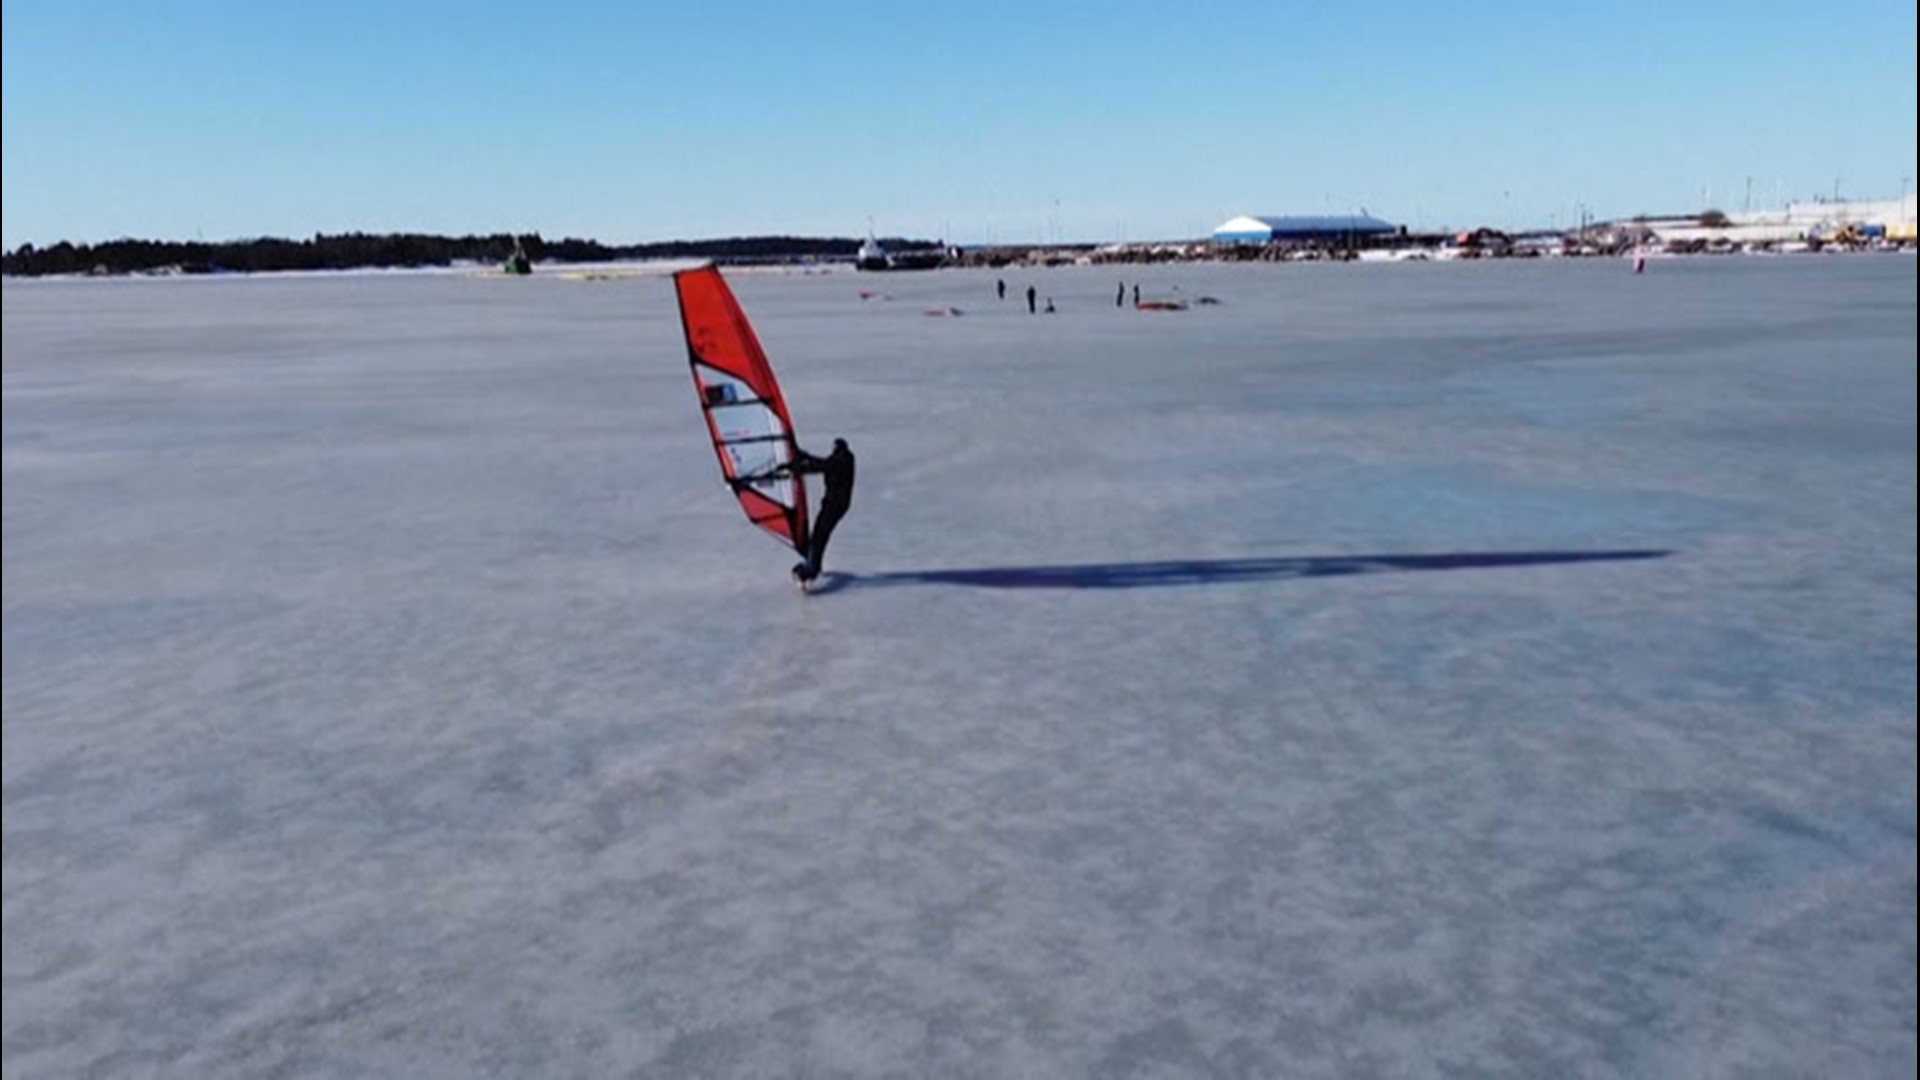 Using homemade gear, a group of windsurfers headed out onto the frozen Baltic Sea in Helsinki, Finland, on Feb. 28, to take advantage of strong winds.